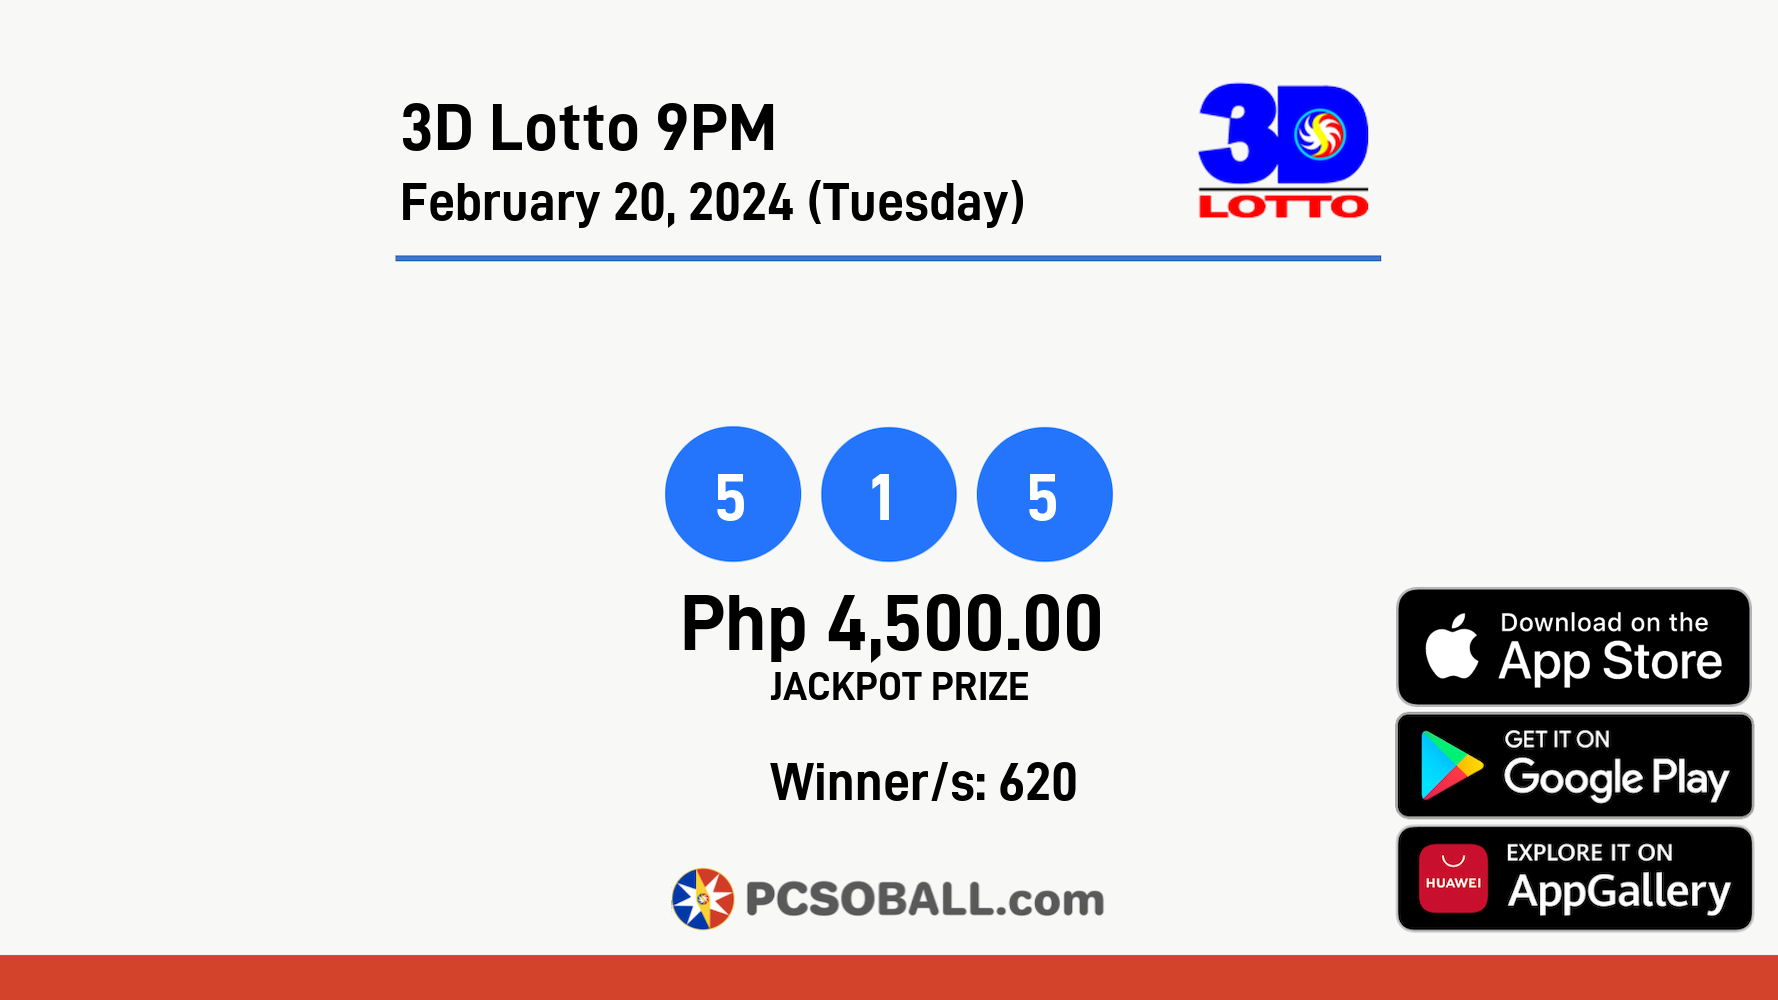 3D Lotto 9PM February 20, 2024 (Tuesday) Result